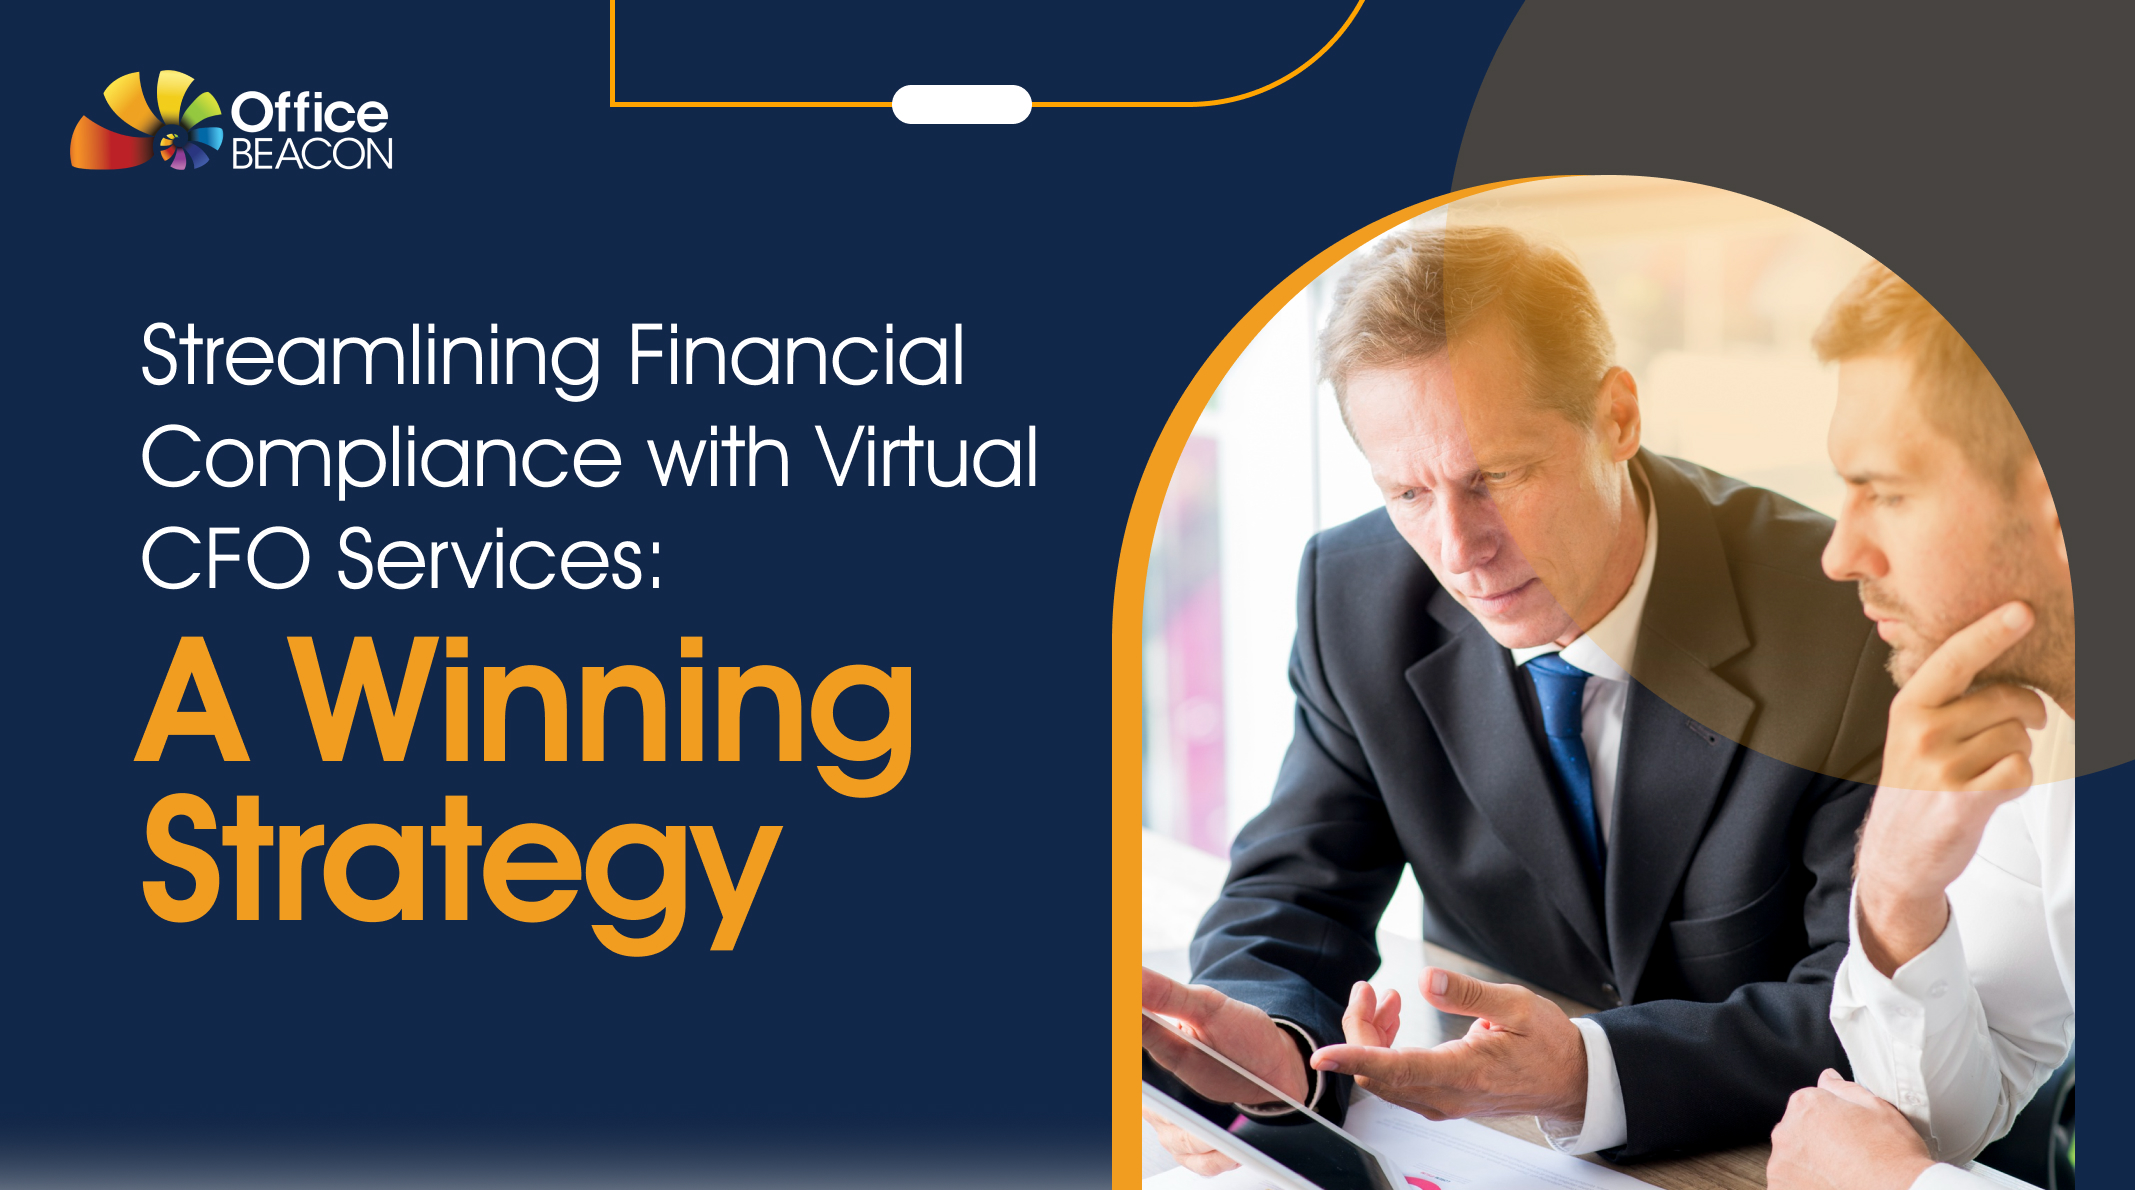 Streamlining Financial Compliance with Virtual CFO Services: A Winning Strategy